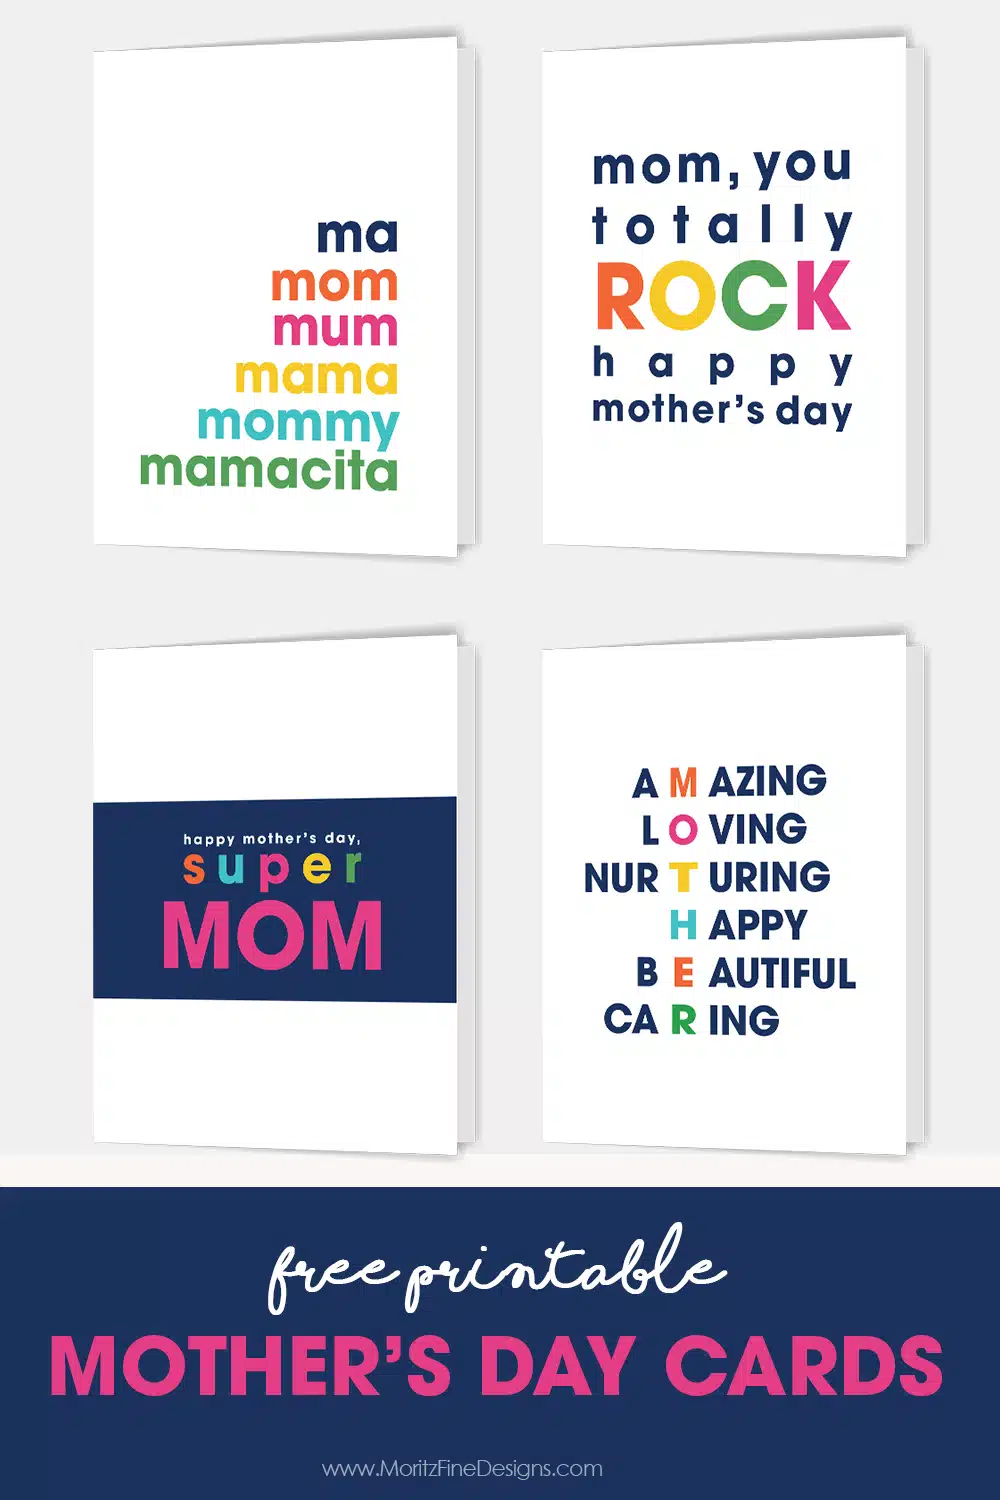 Use these free Printable Mother's Day cards for your mom on Mother's Day. Easy and fast to download and print.